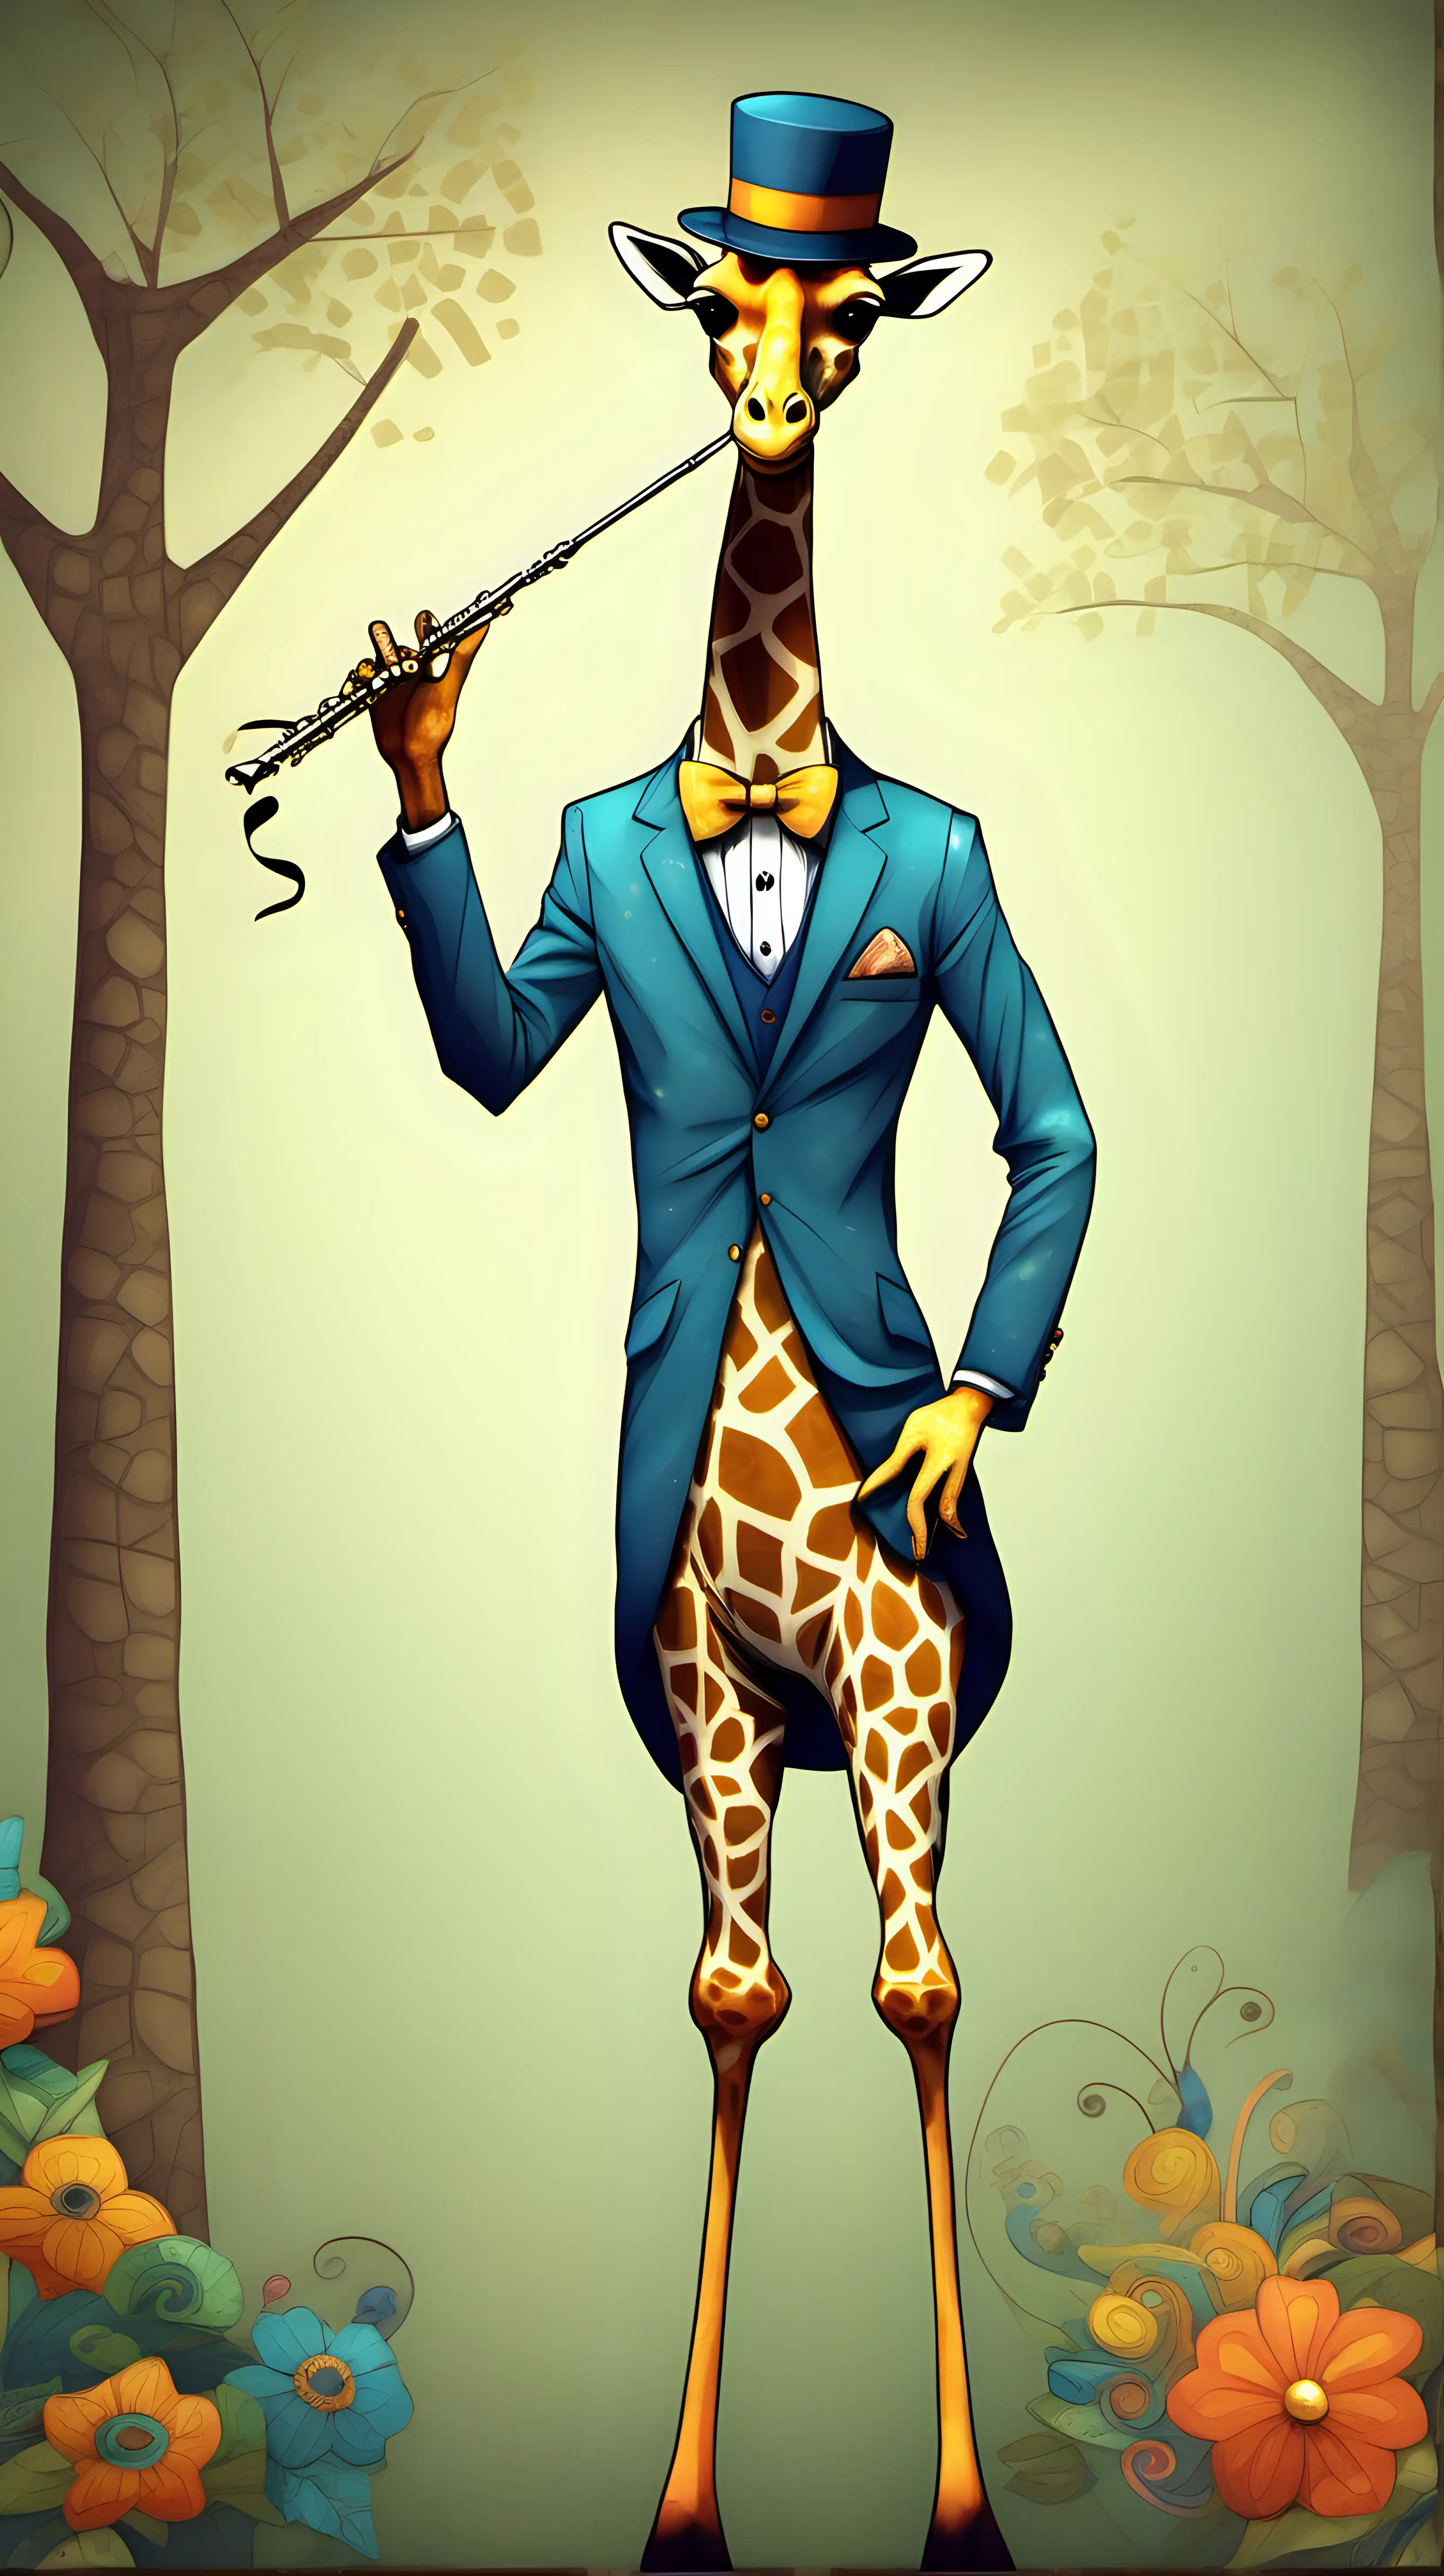 Whimsical Giraffe in a Dapper Suit Playing a Flute in Dreamland